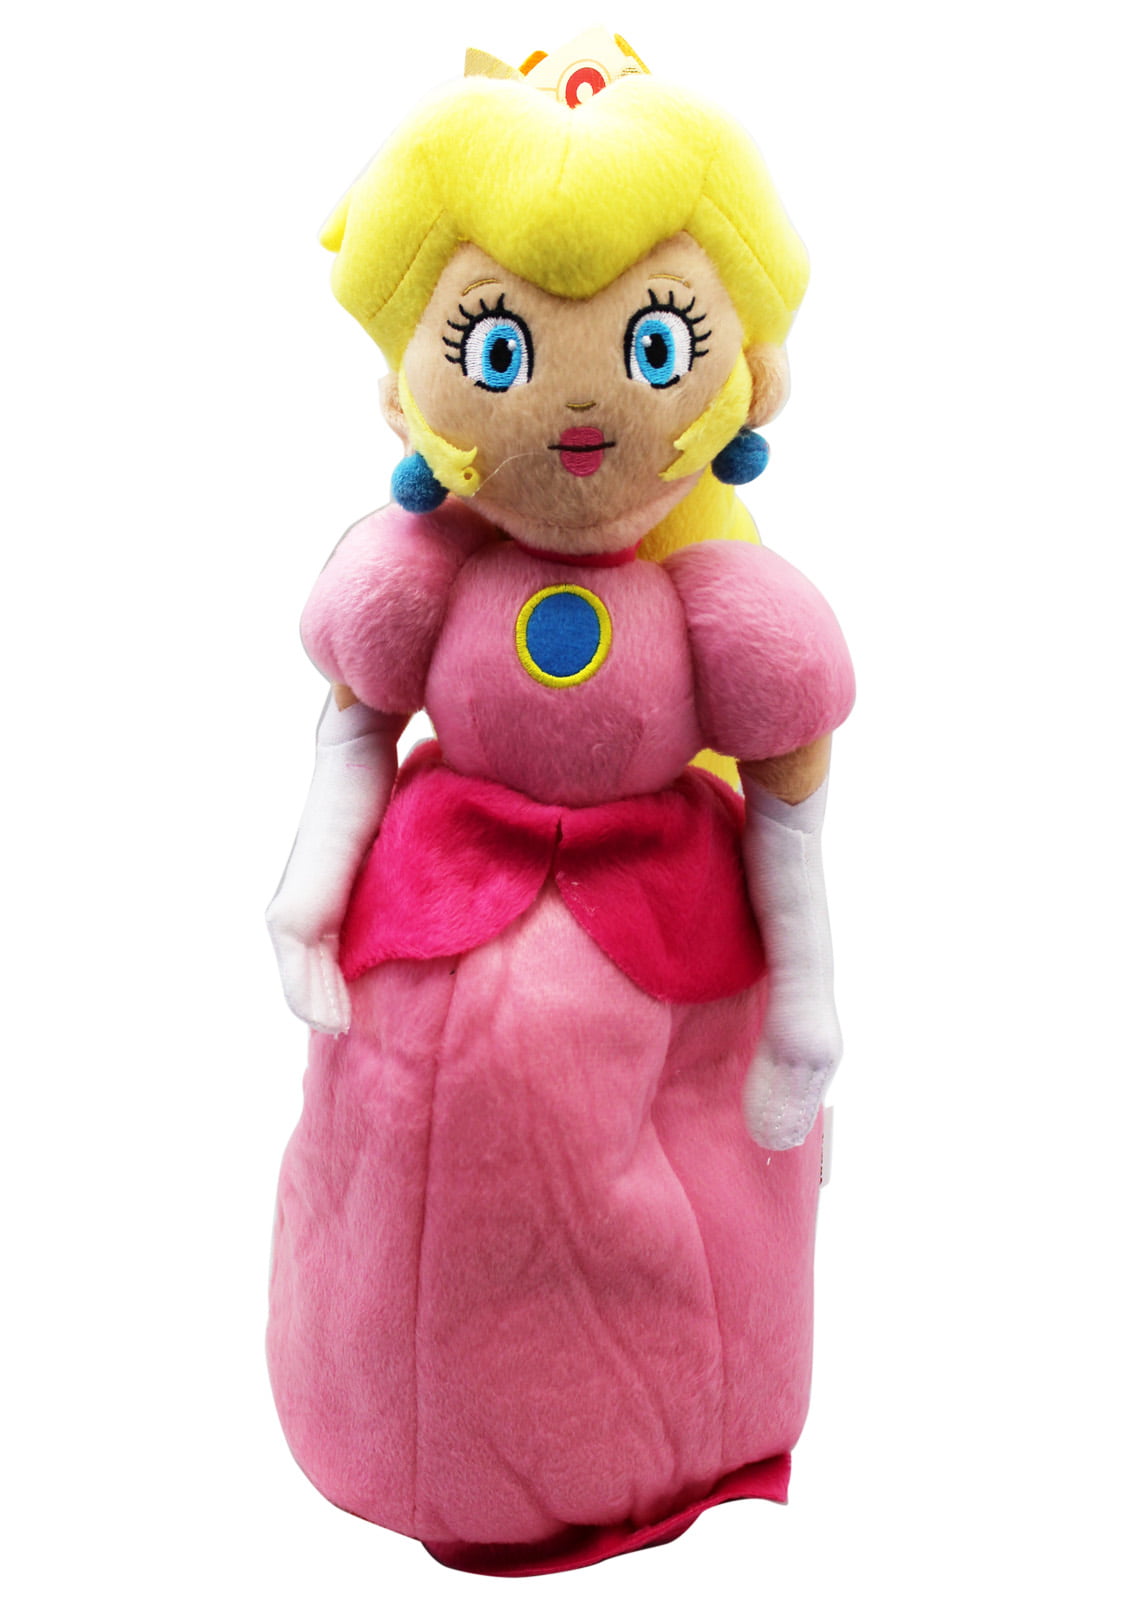 Super Mario All Star Collection King Koopa & Princess Peach Plush Doll Toy Gift 